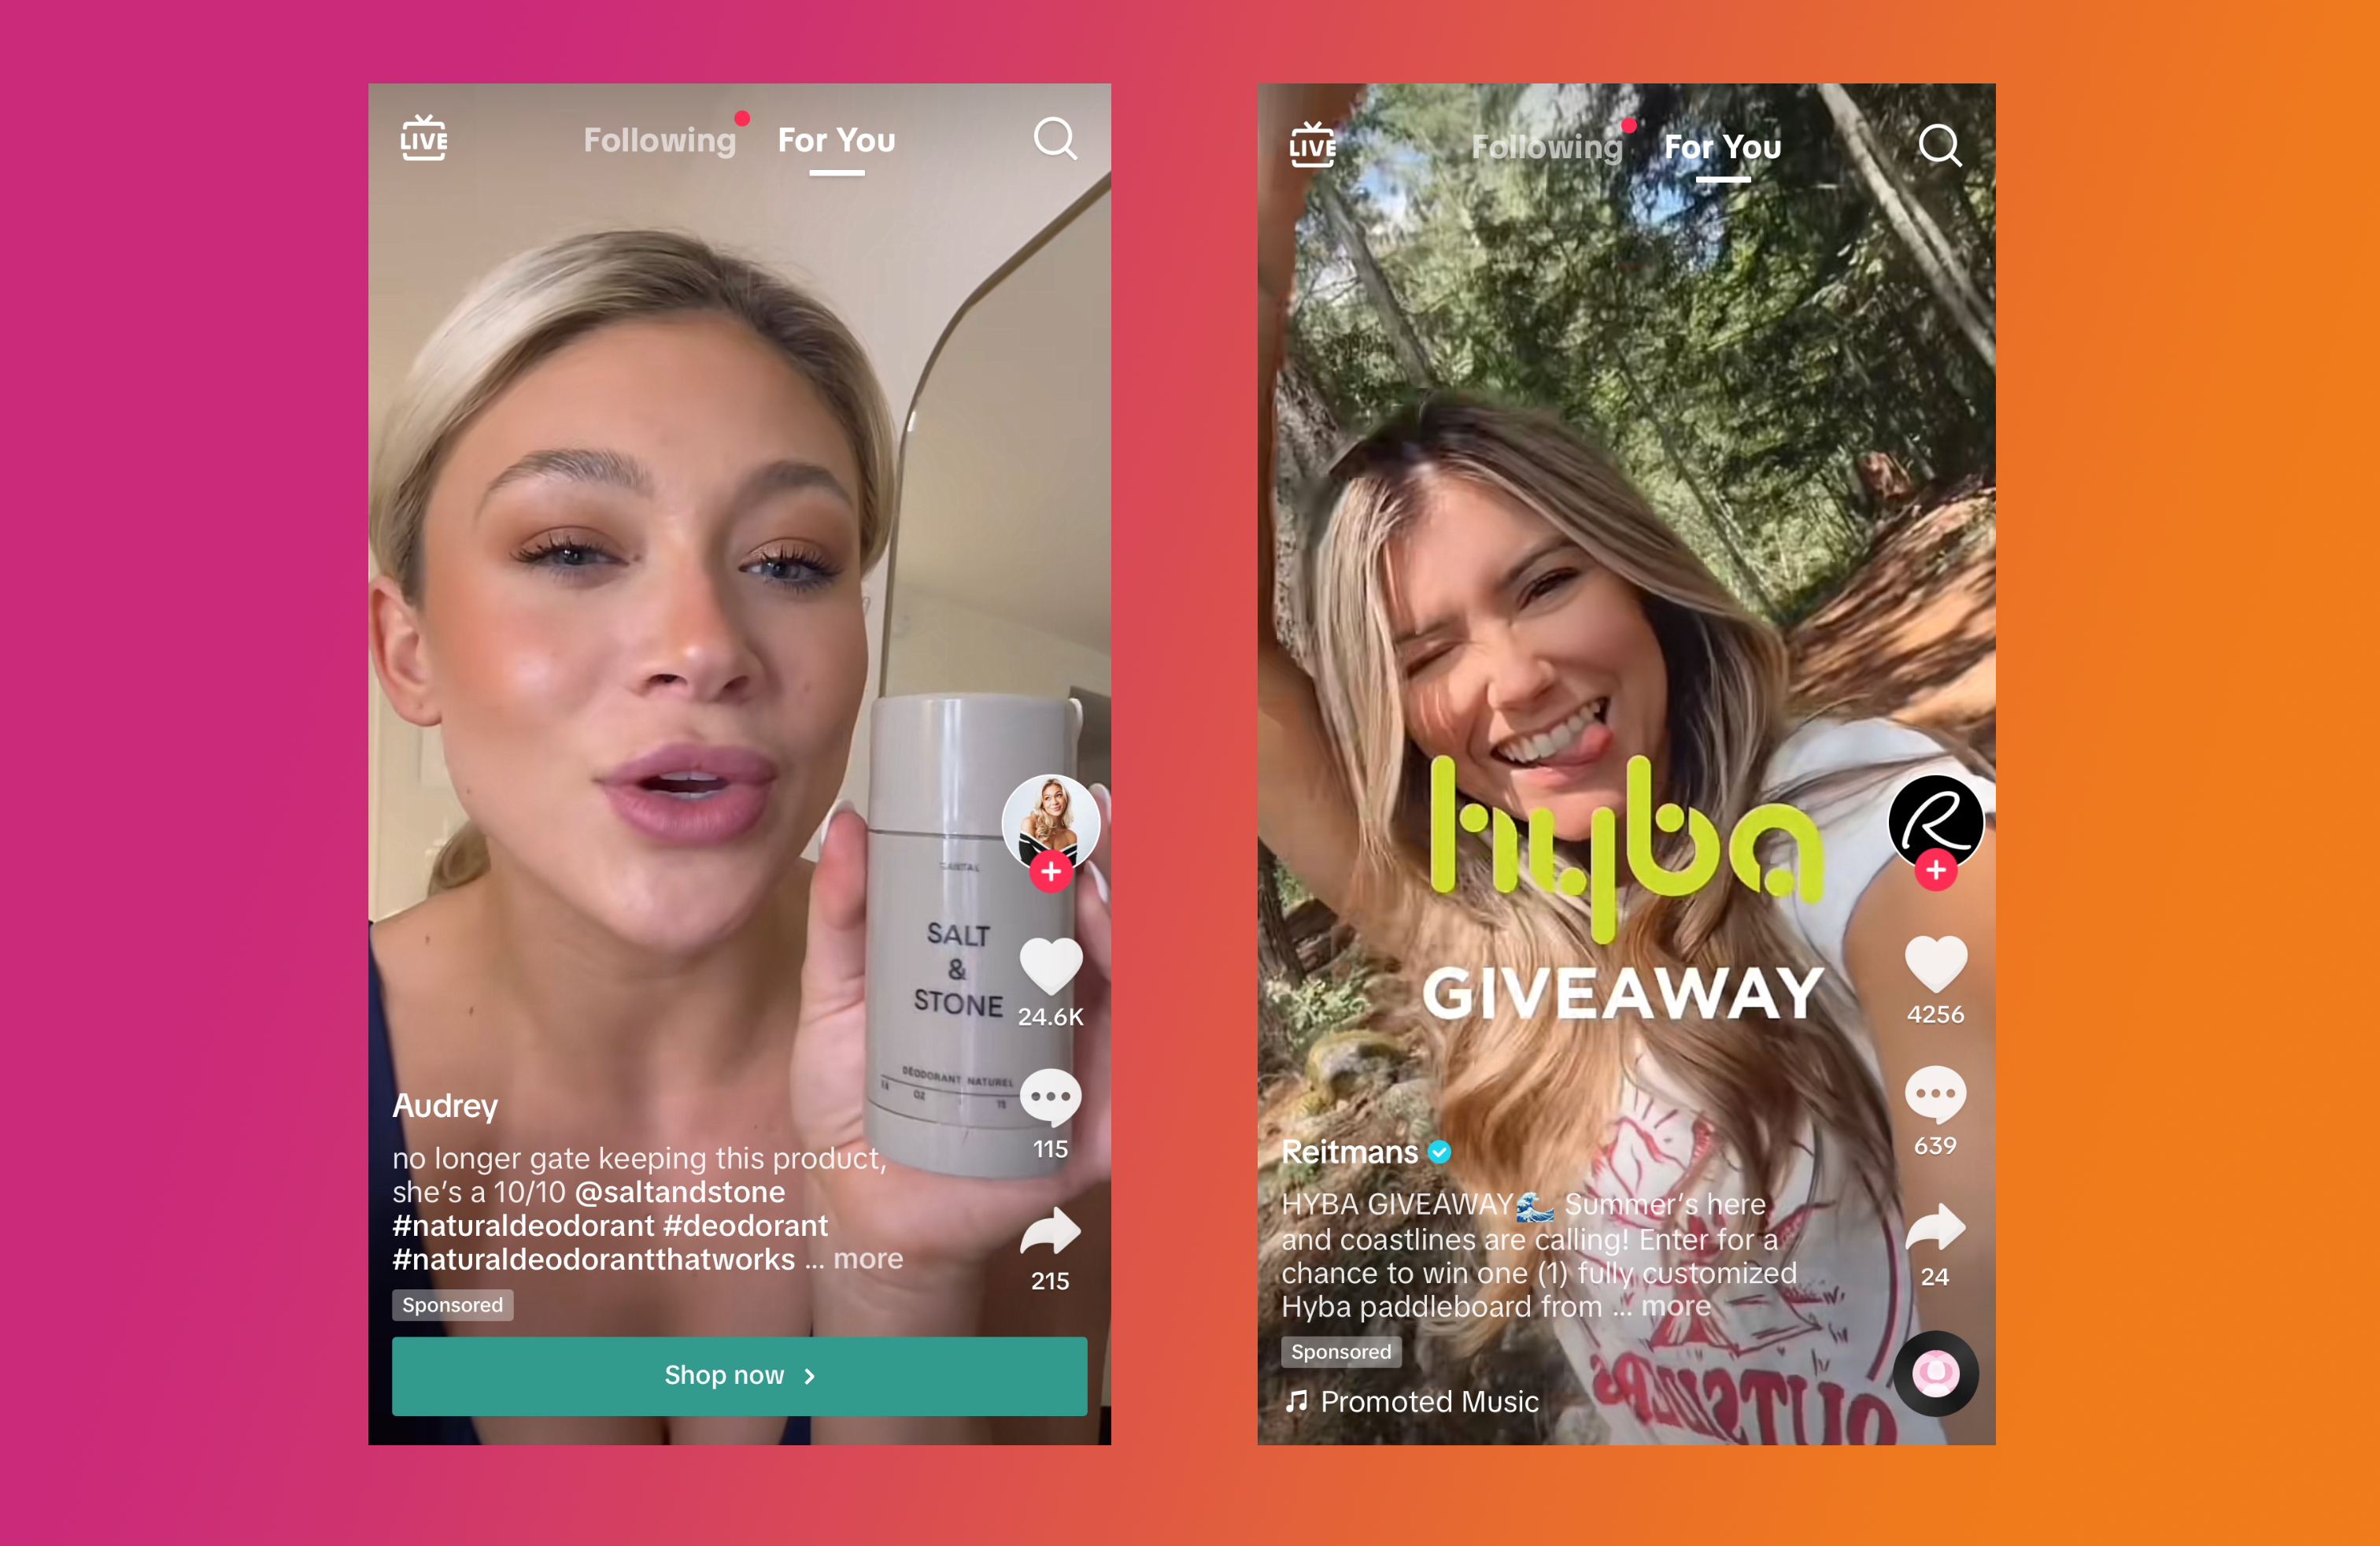 Reach more people (and sell more stuff) with TikTok ads from Vimeo Create